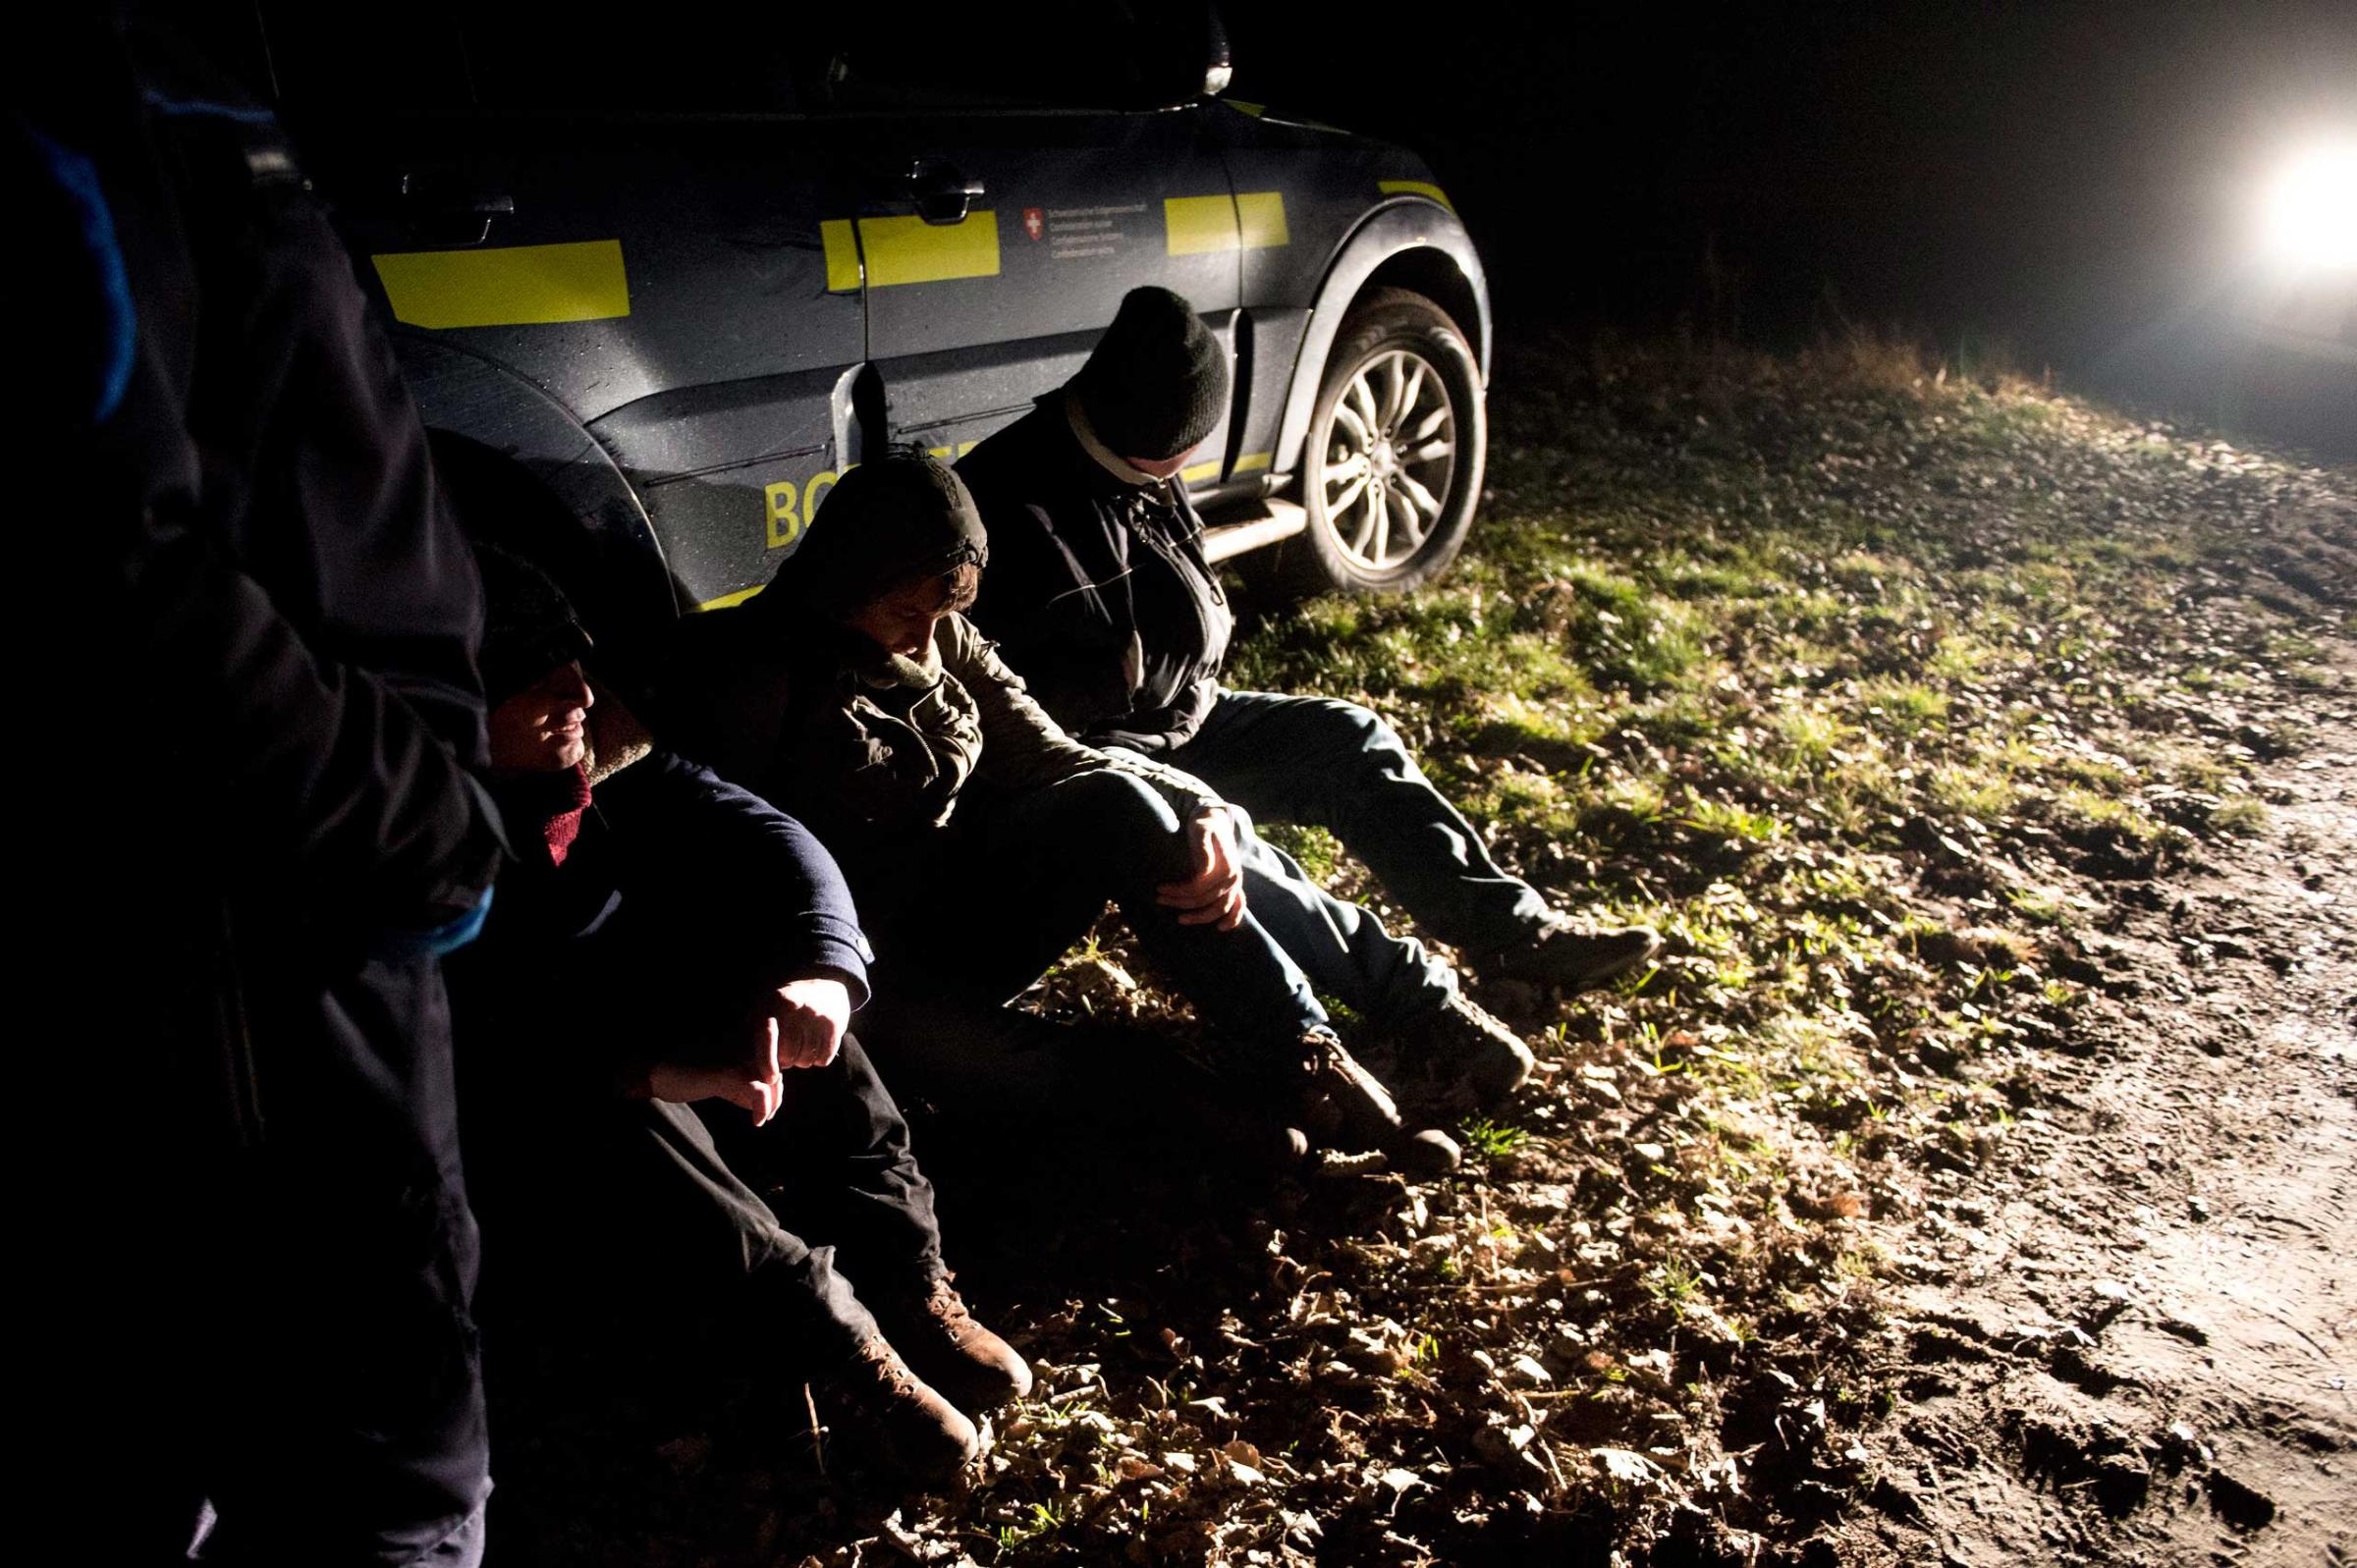 Migrants are detained by a Hungarian civil guard after being caught on the Hungarian-Serbian border near Roszke, south of Szeged, 100 miles south of Budapest, Hungary on Jan. 19, 2015.